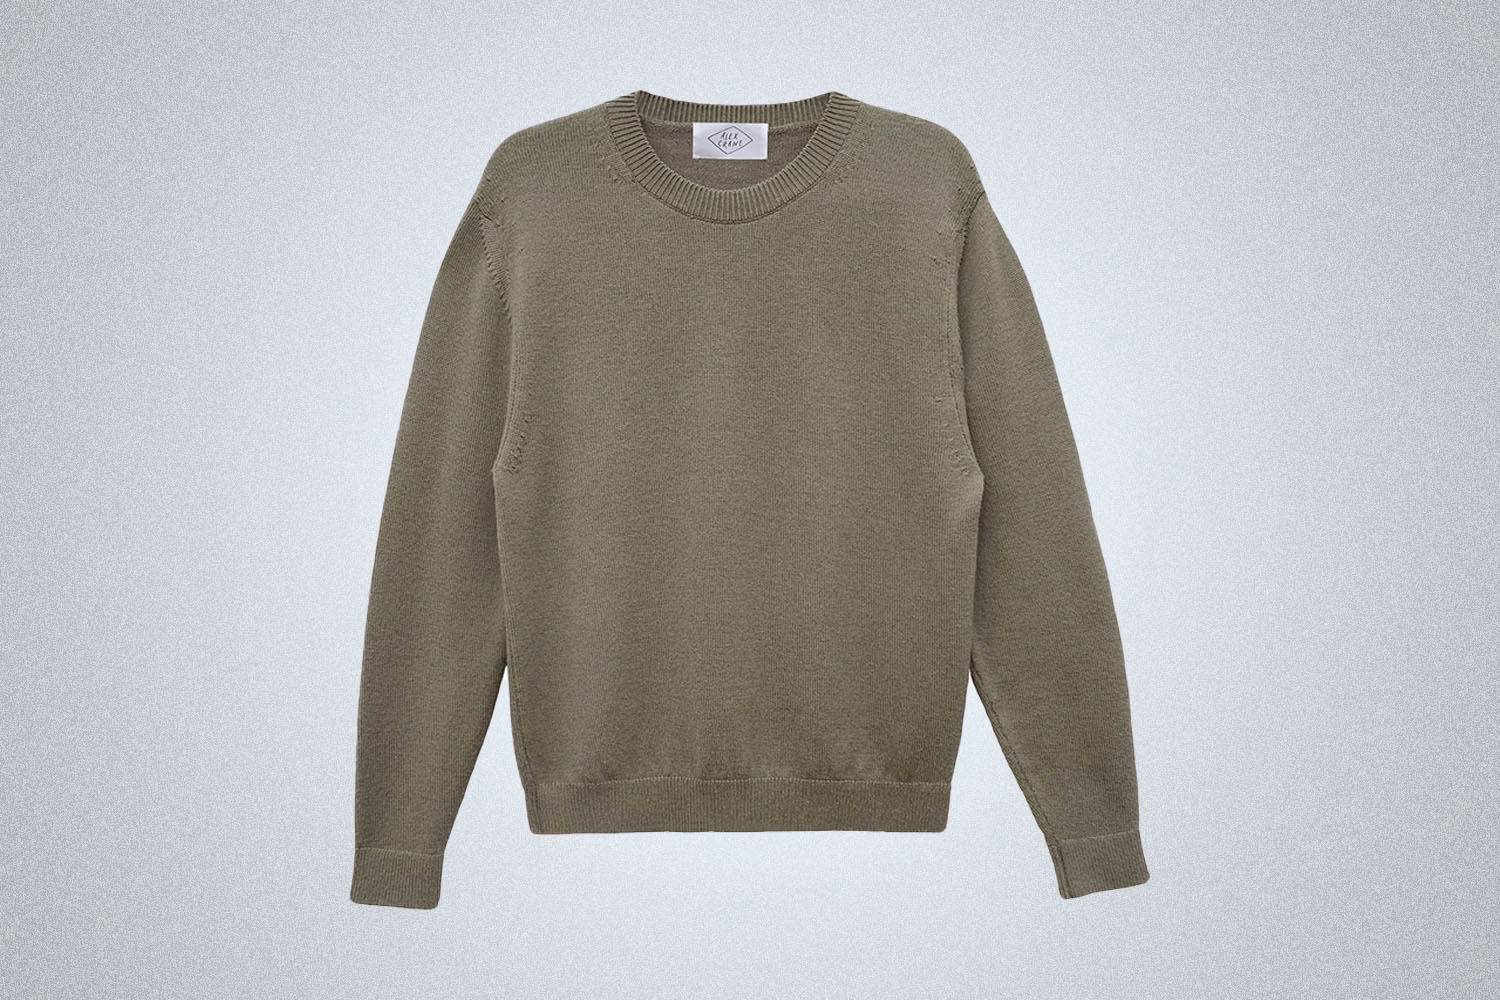 a green sweater on a gray background